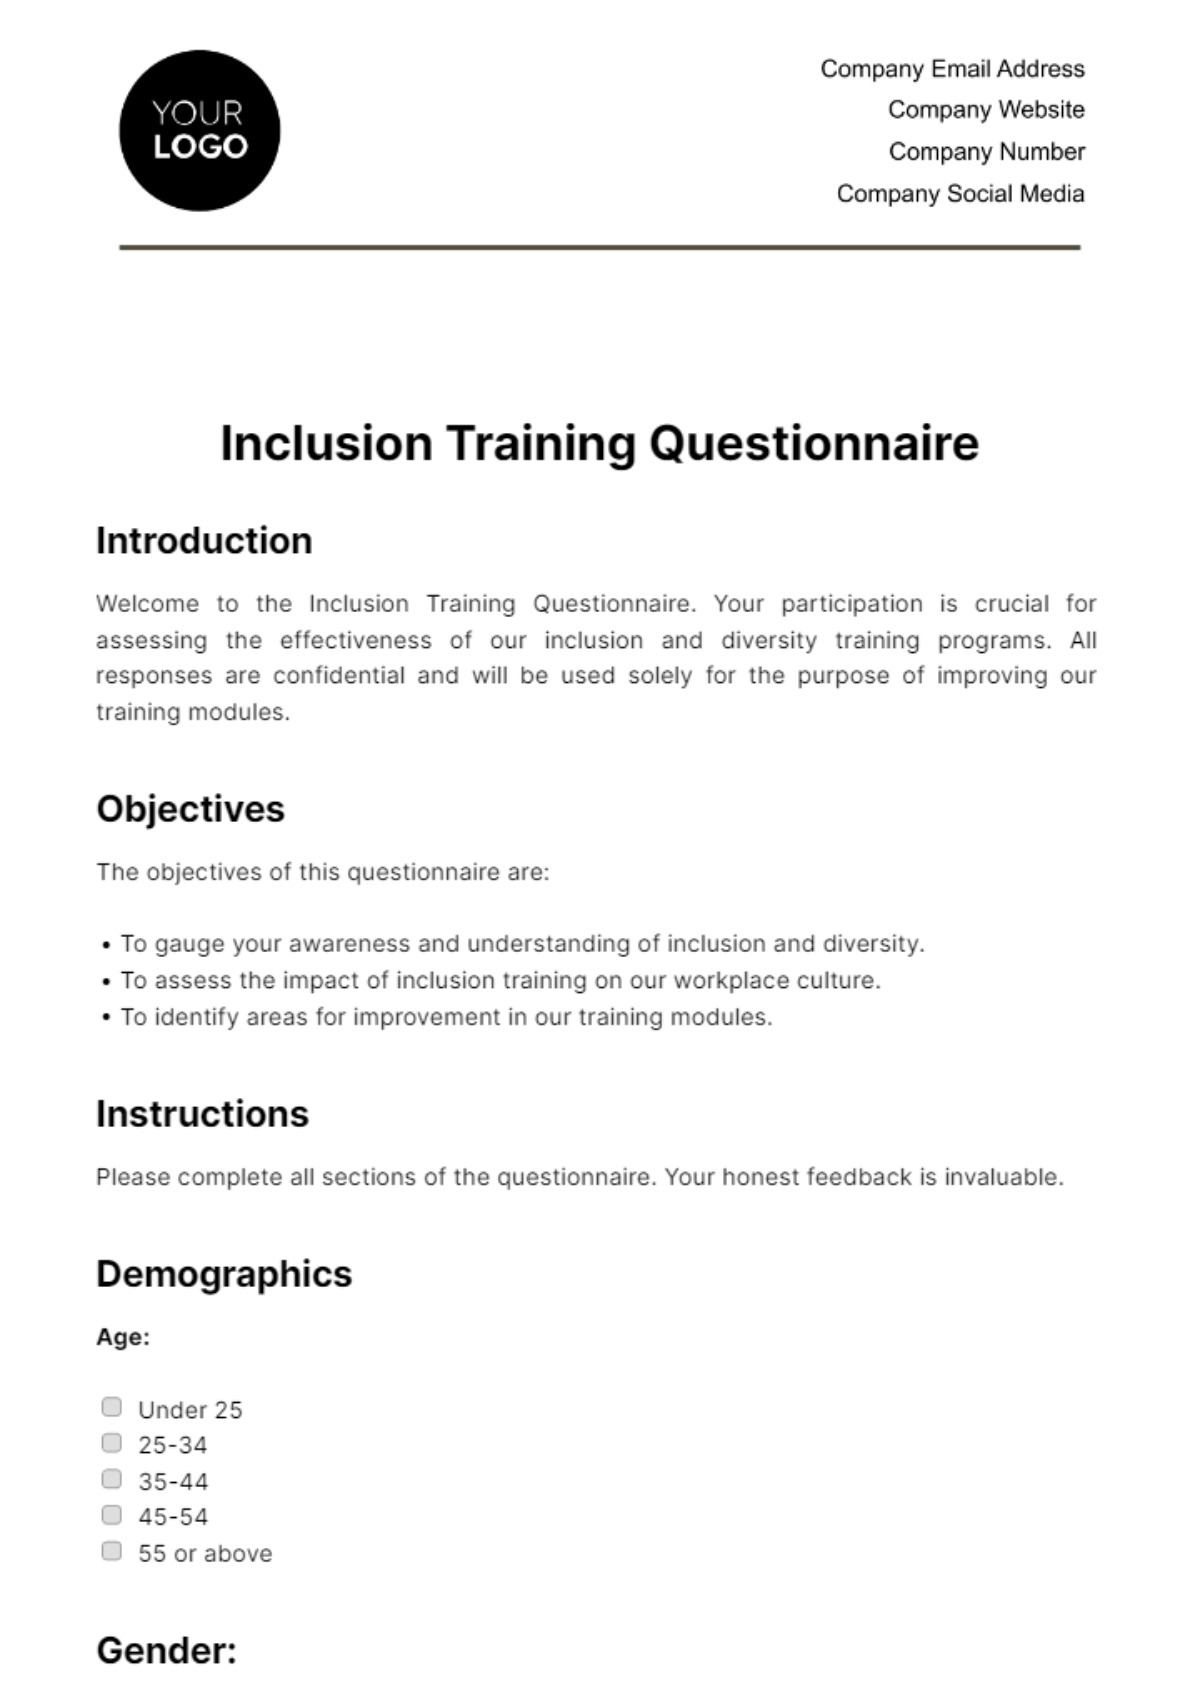 Free Inclusion Training Questionnaire HR Template